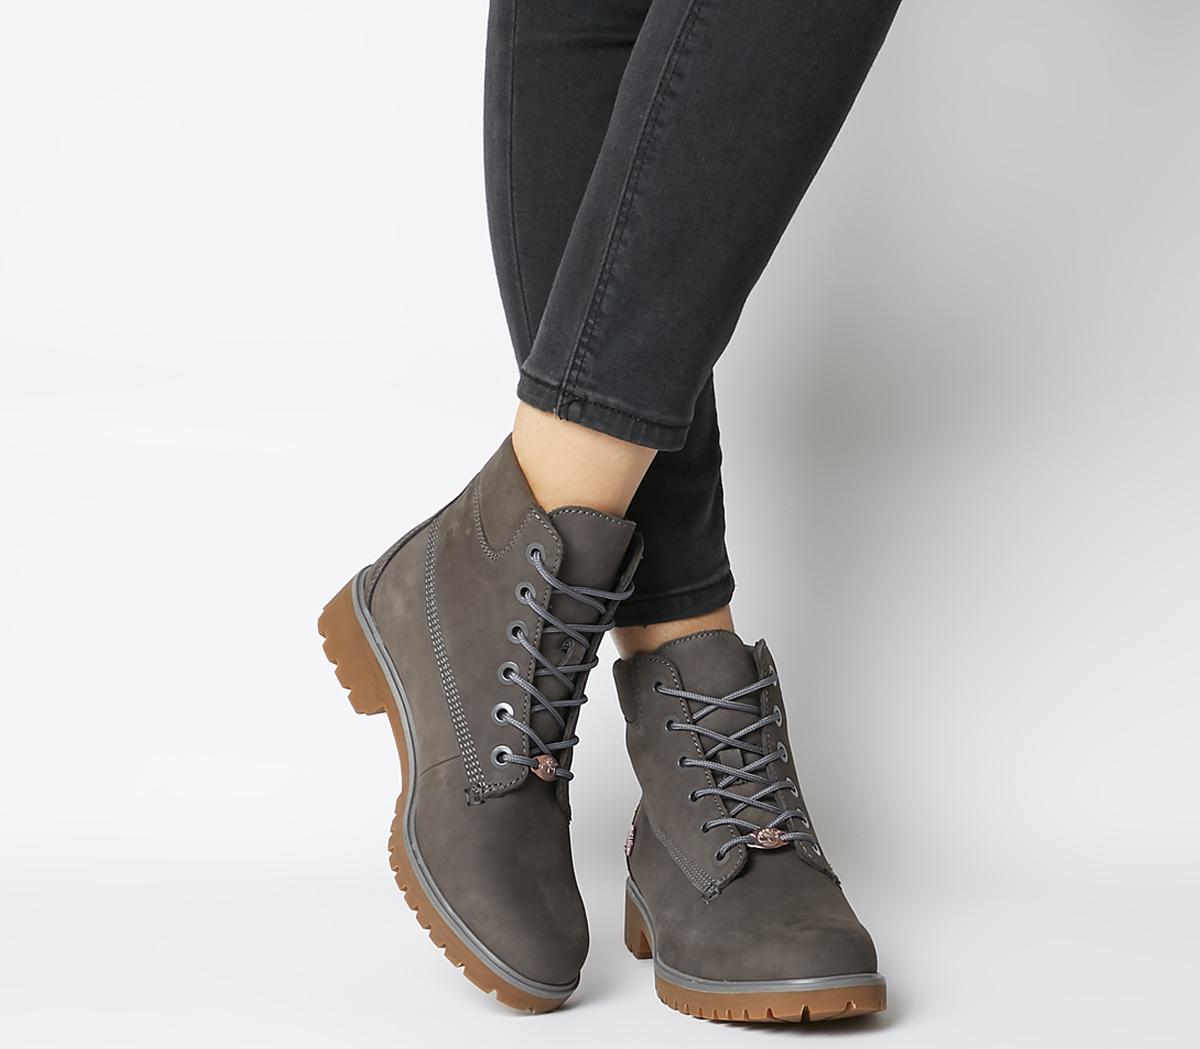 timberland grey ankle boots